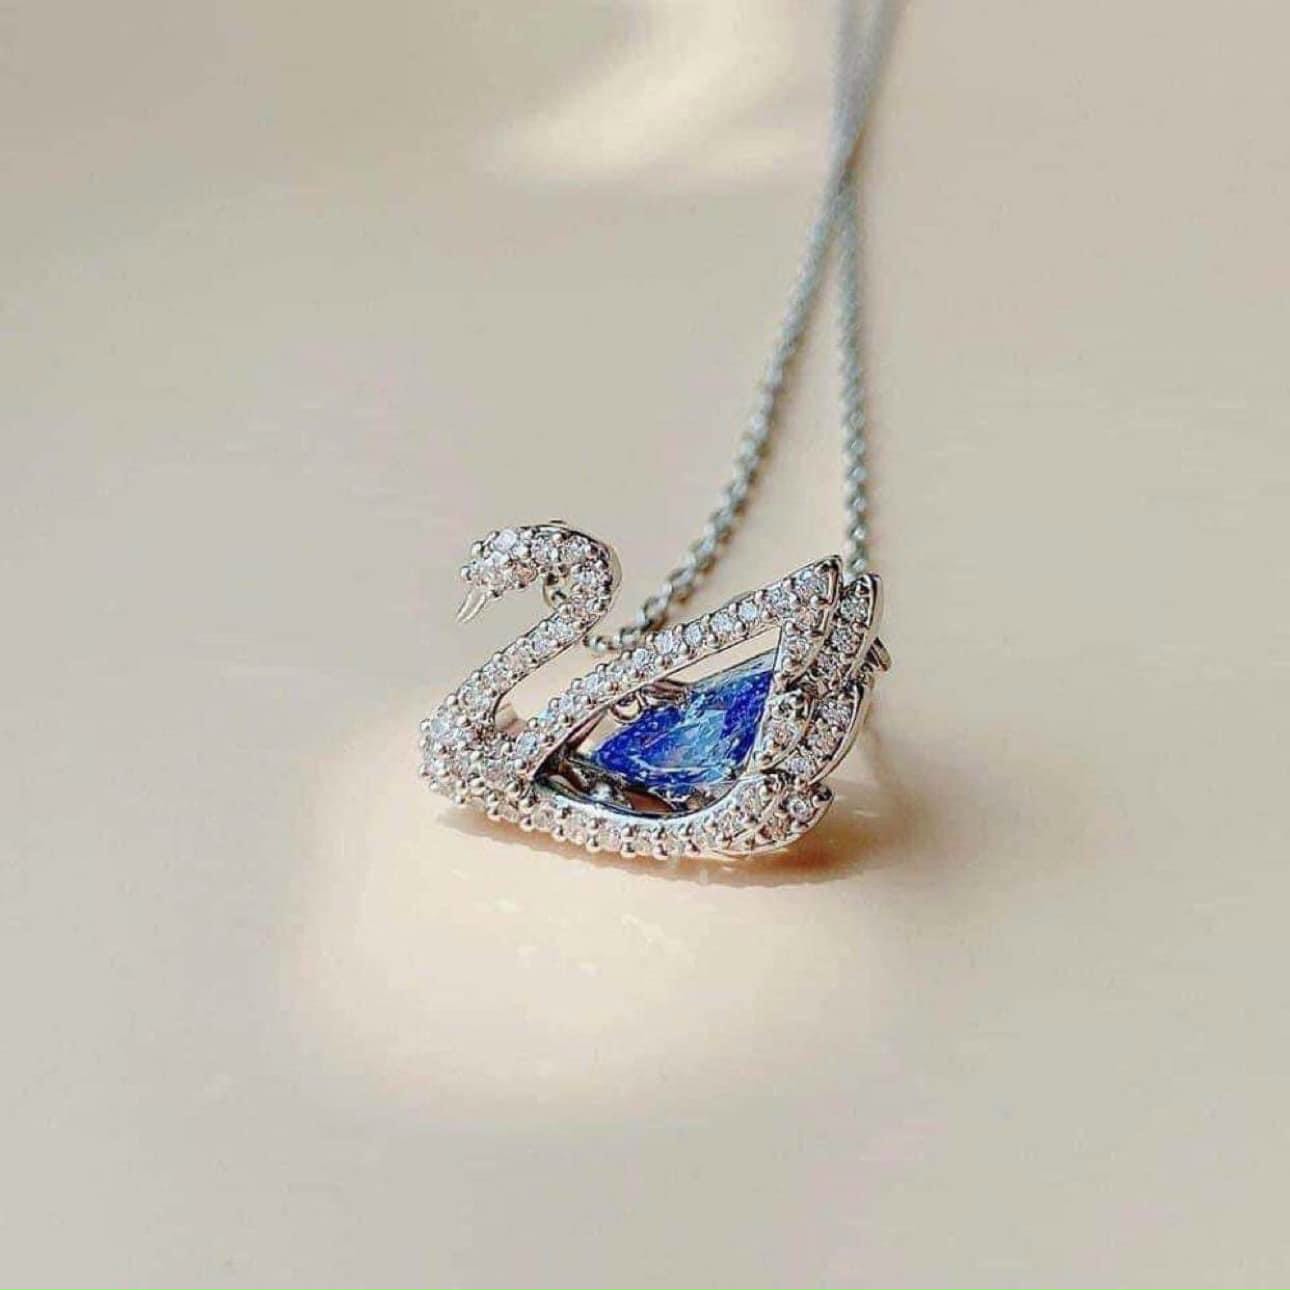 DÂY CHUYỀN NỮ DANCING SWAN NECKLACE, BLUE, RHODIUM PLATED 13